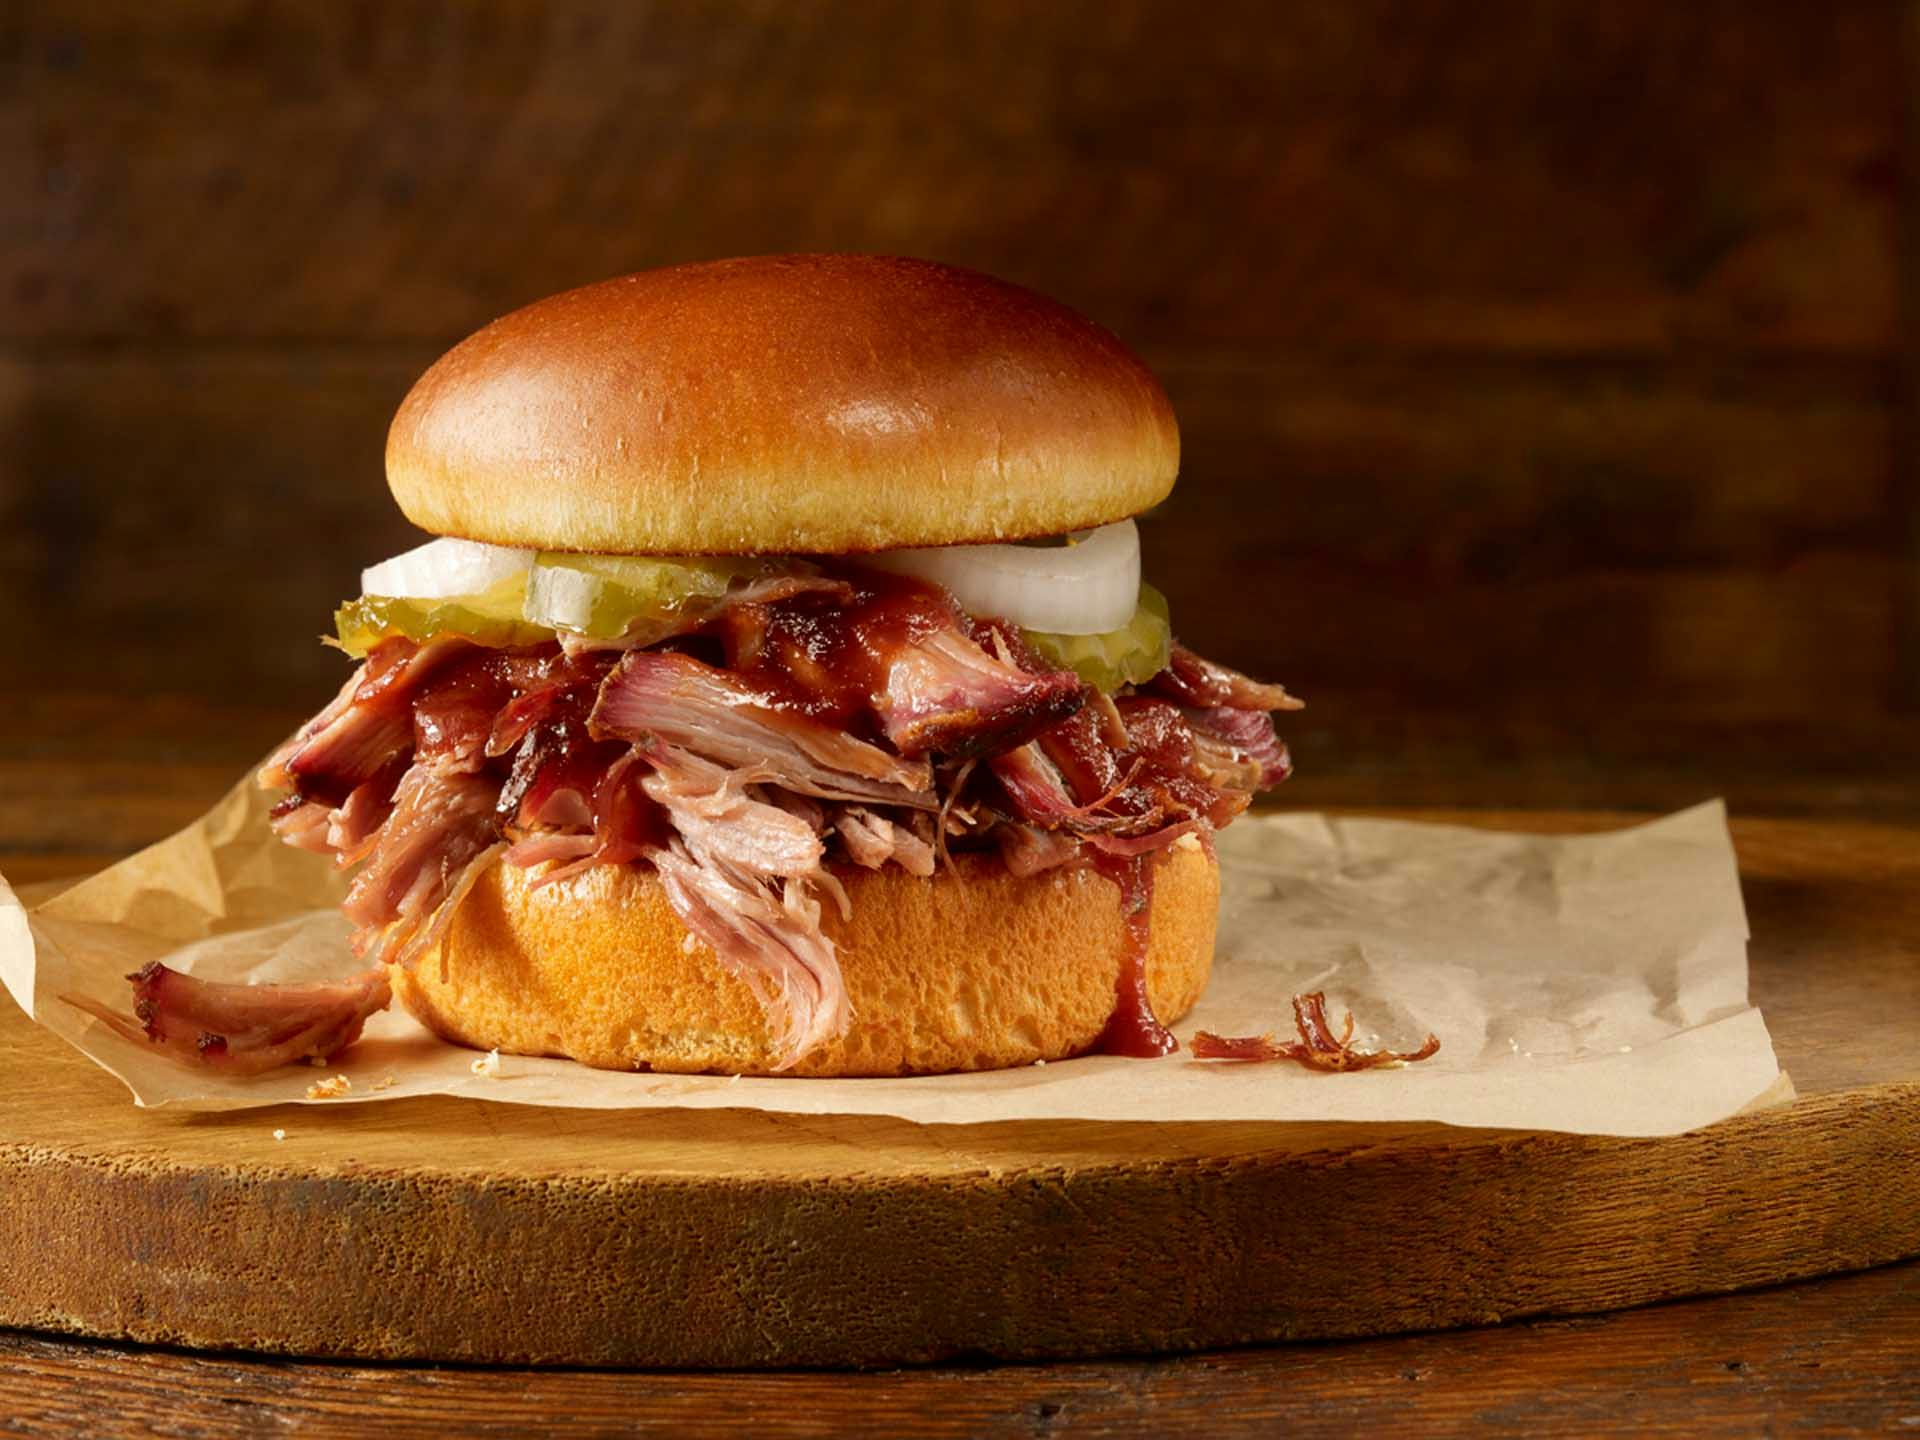 Acadiana Advocate: Coming to Carencro, Dickey's Barbecue Pit